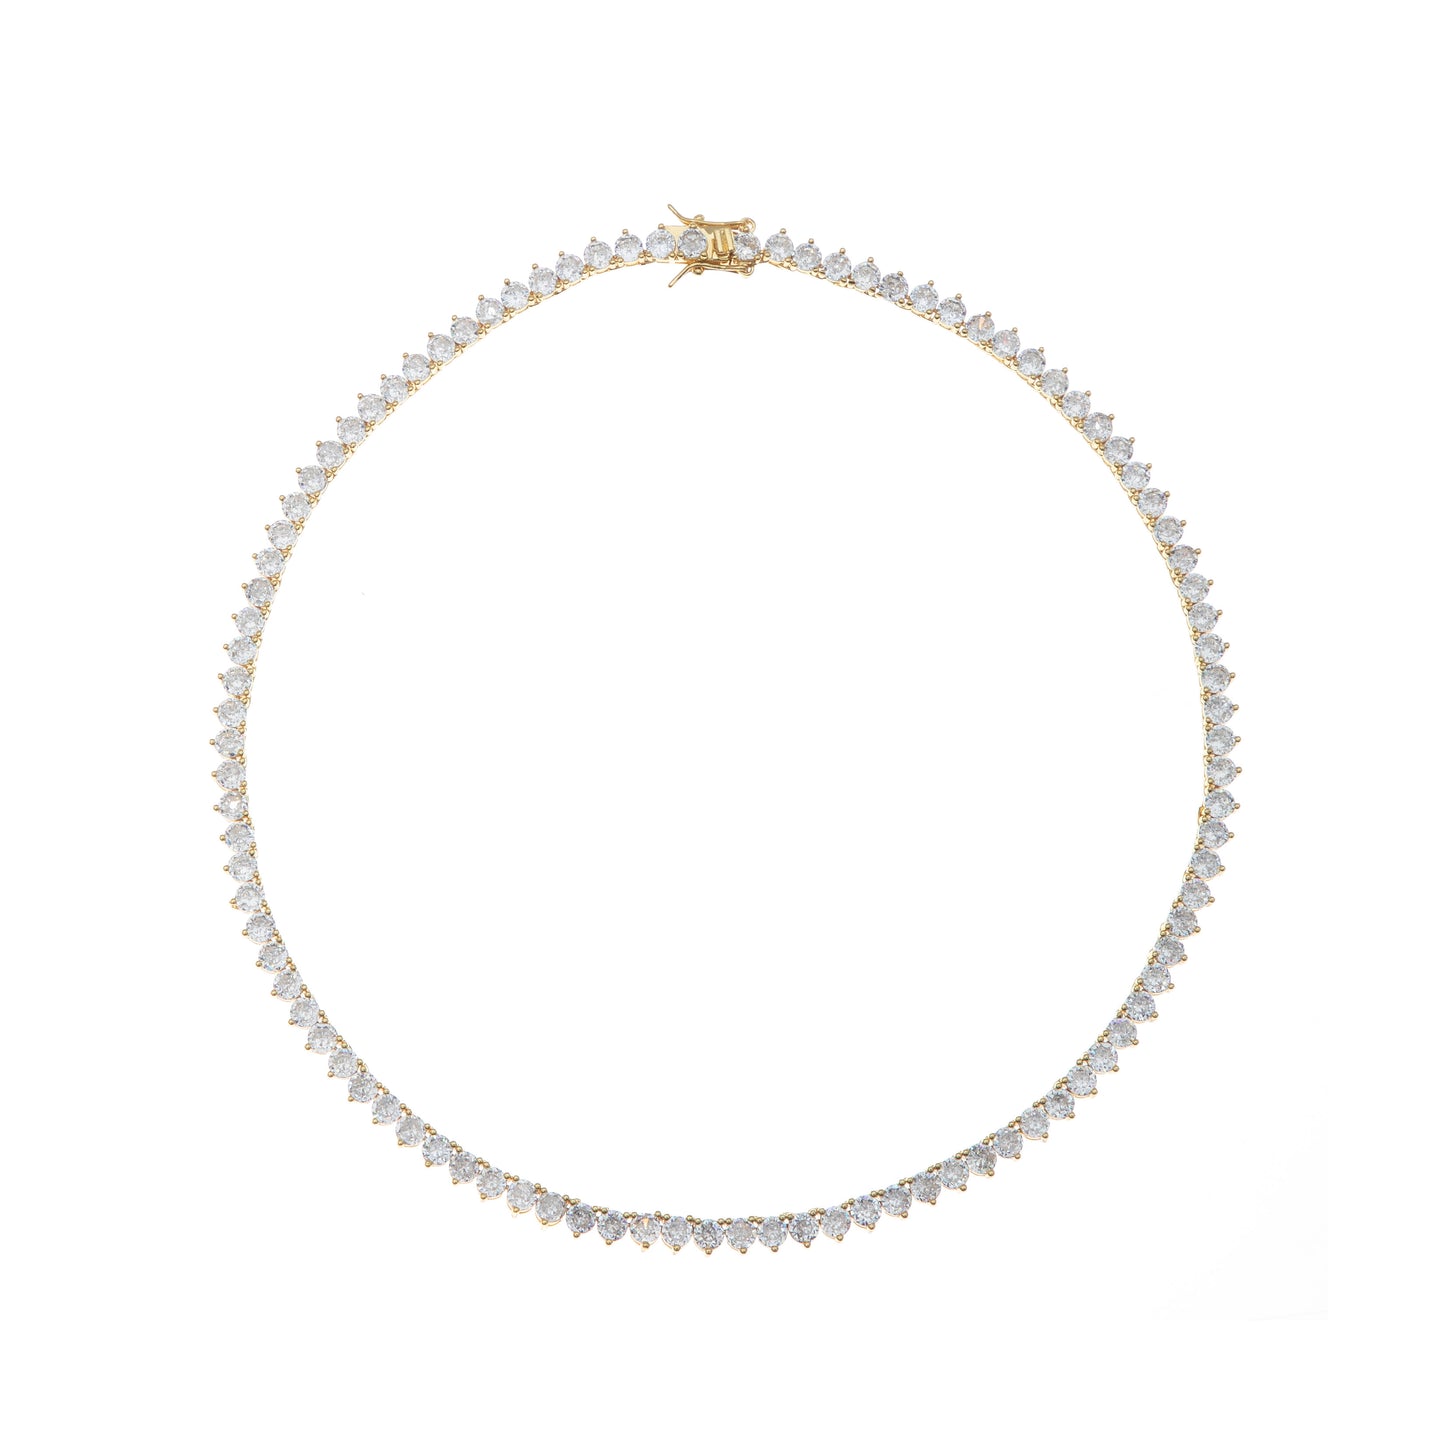 GOLD CLASSIC TENNIS NECKLACE